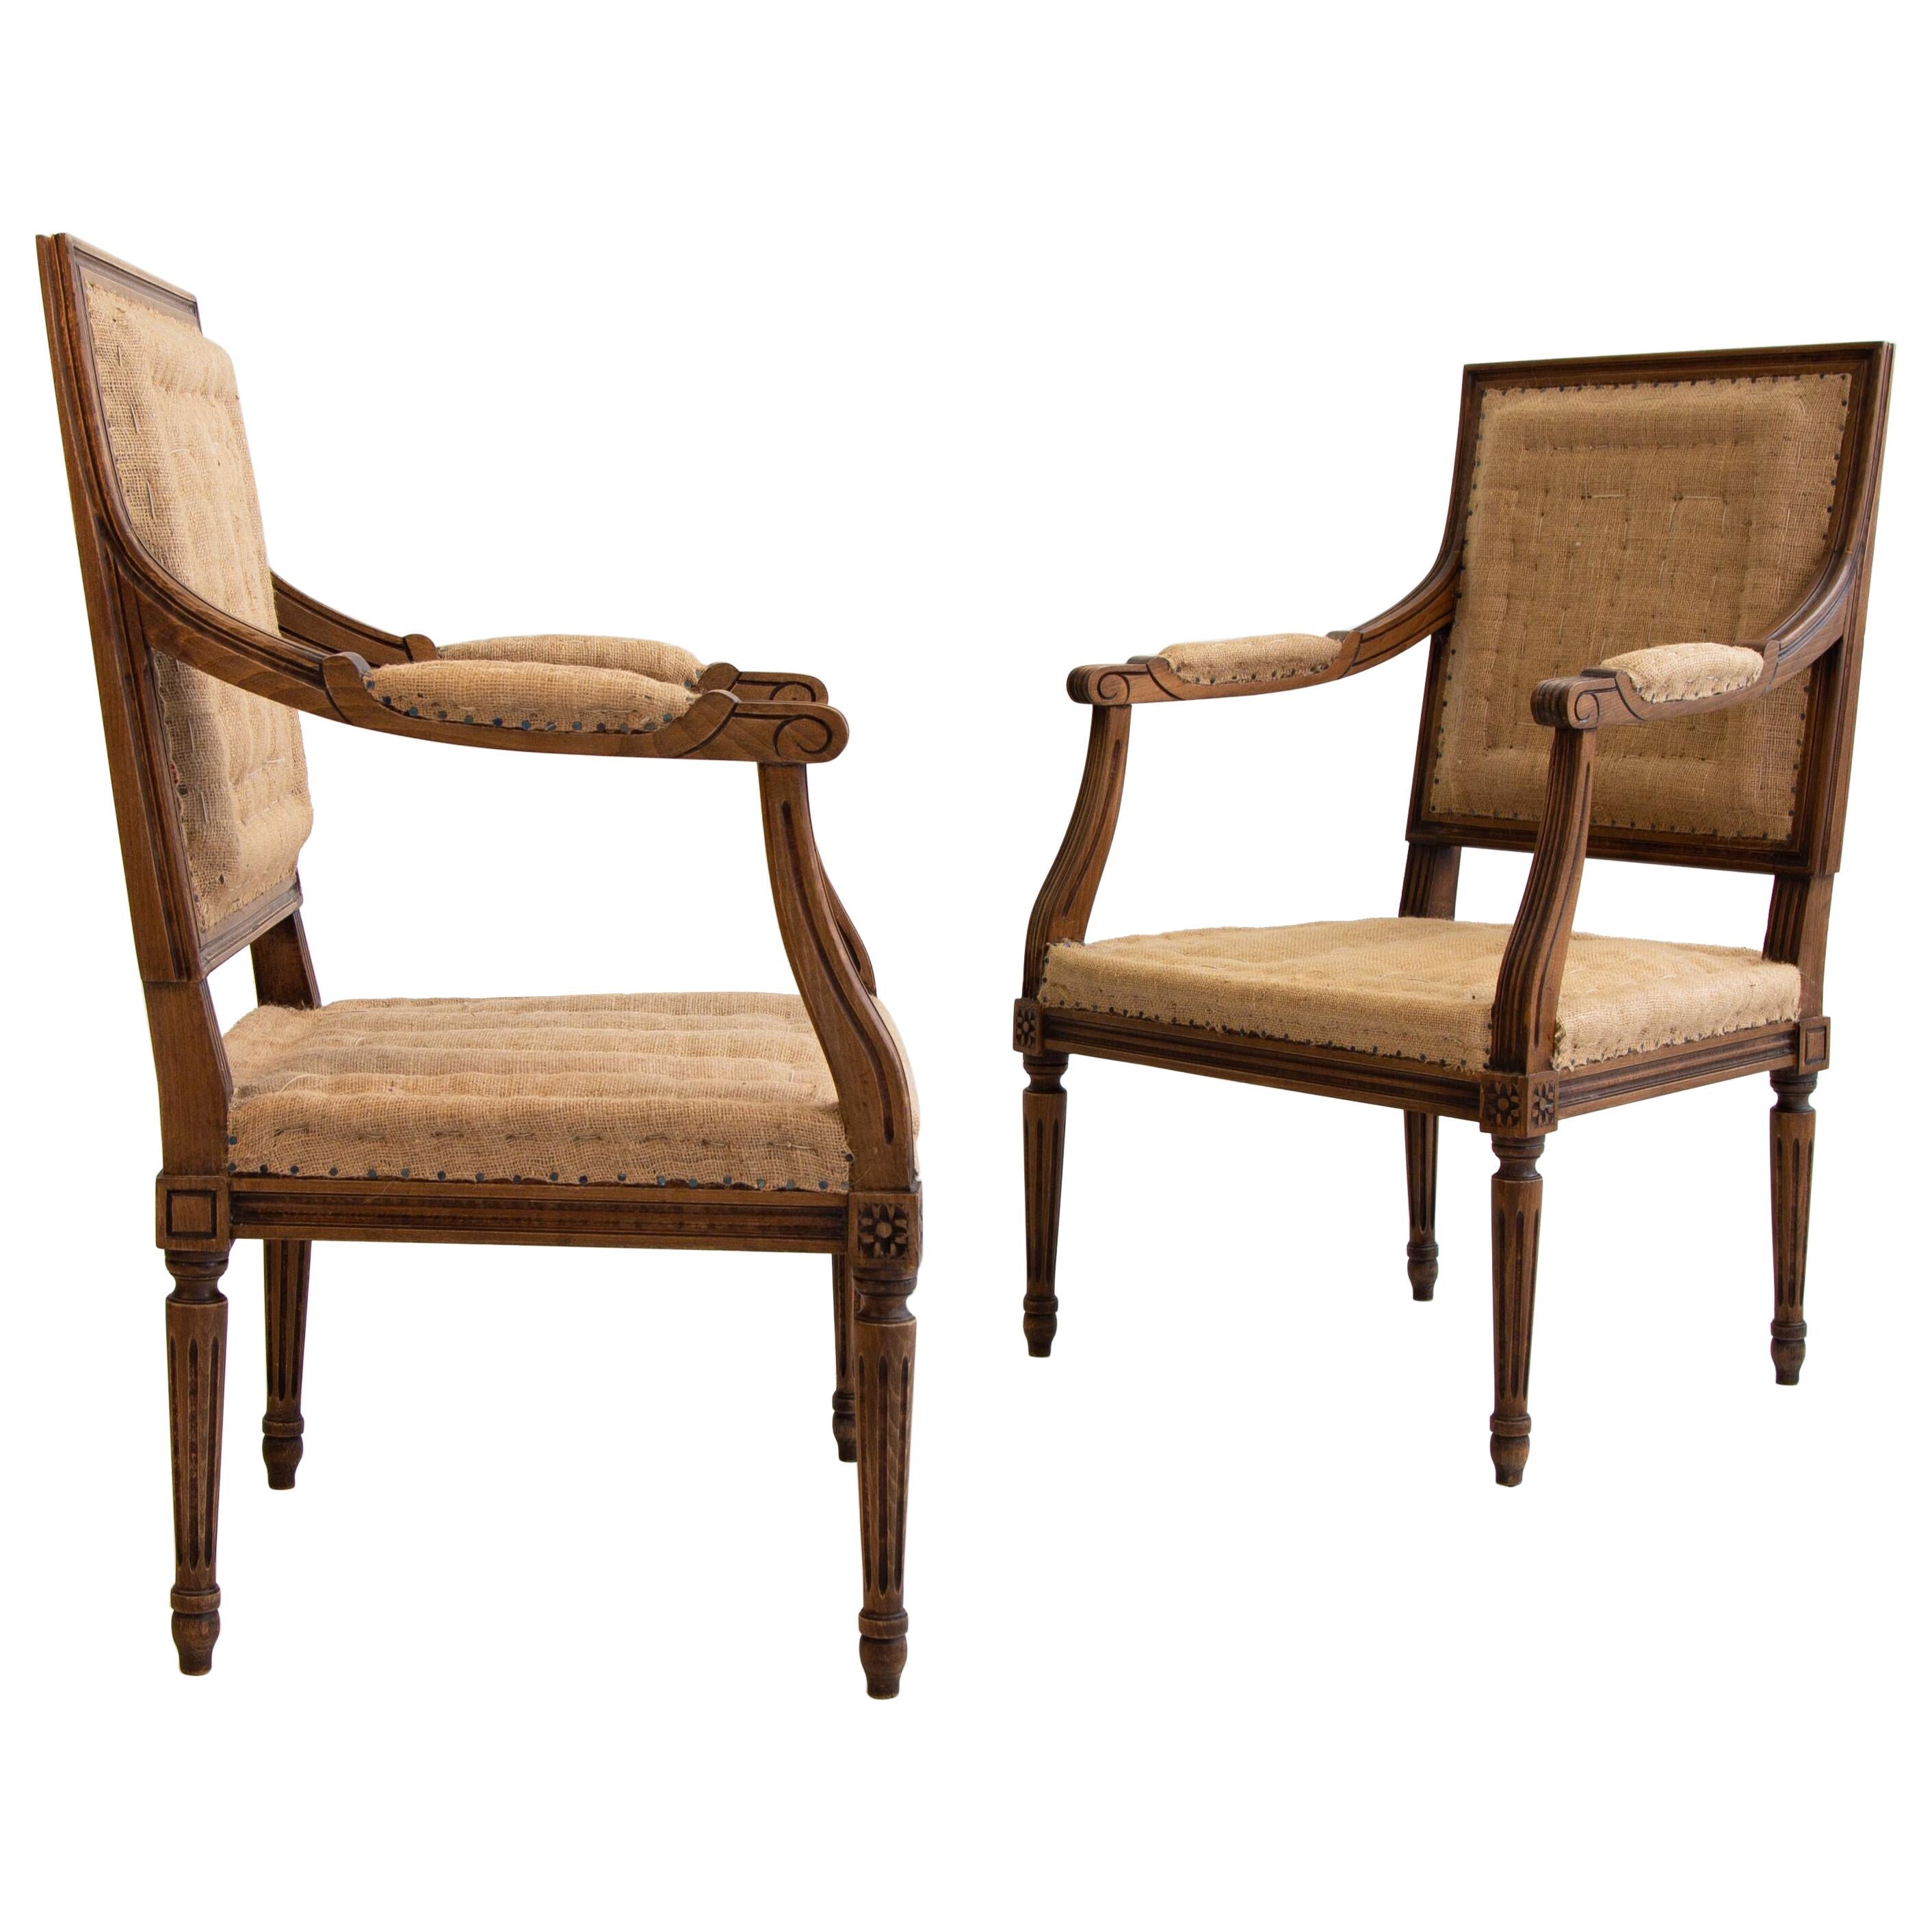 Vintage Pair of Carved Wood Fauteuil Louis XVI Armchairs, France